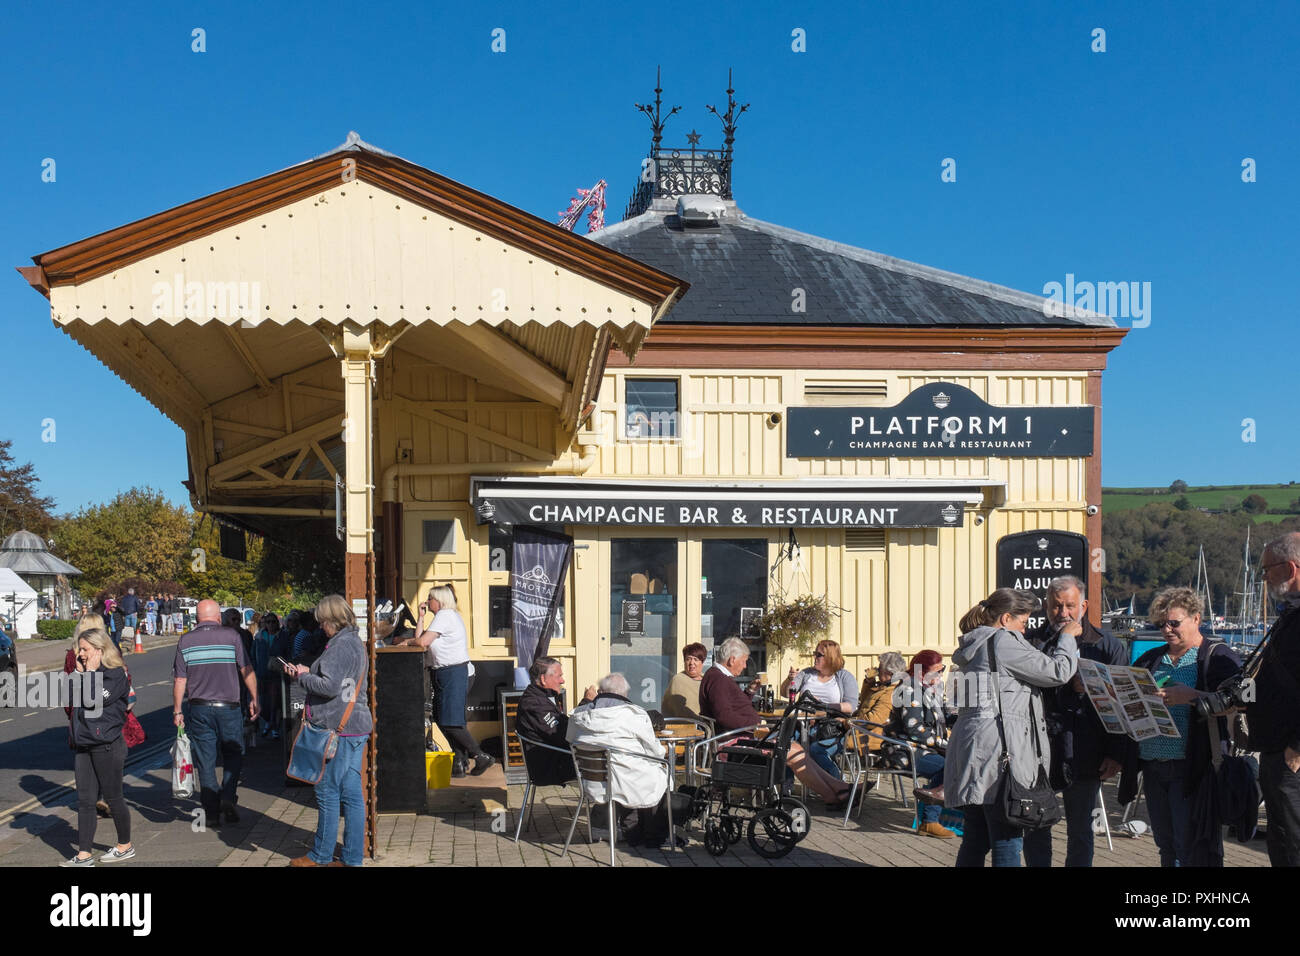 Platform 1 Champagne Bar and Restaurant in an old station on the Embankment in Dartmouth, Devon Stock Photo